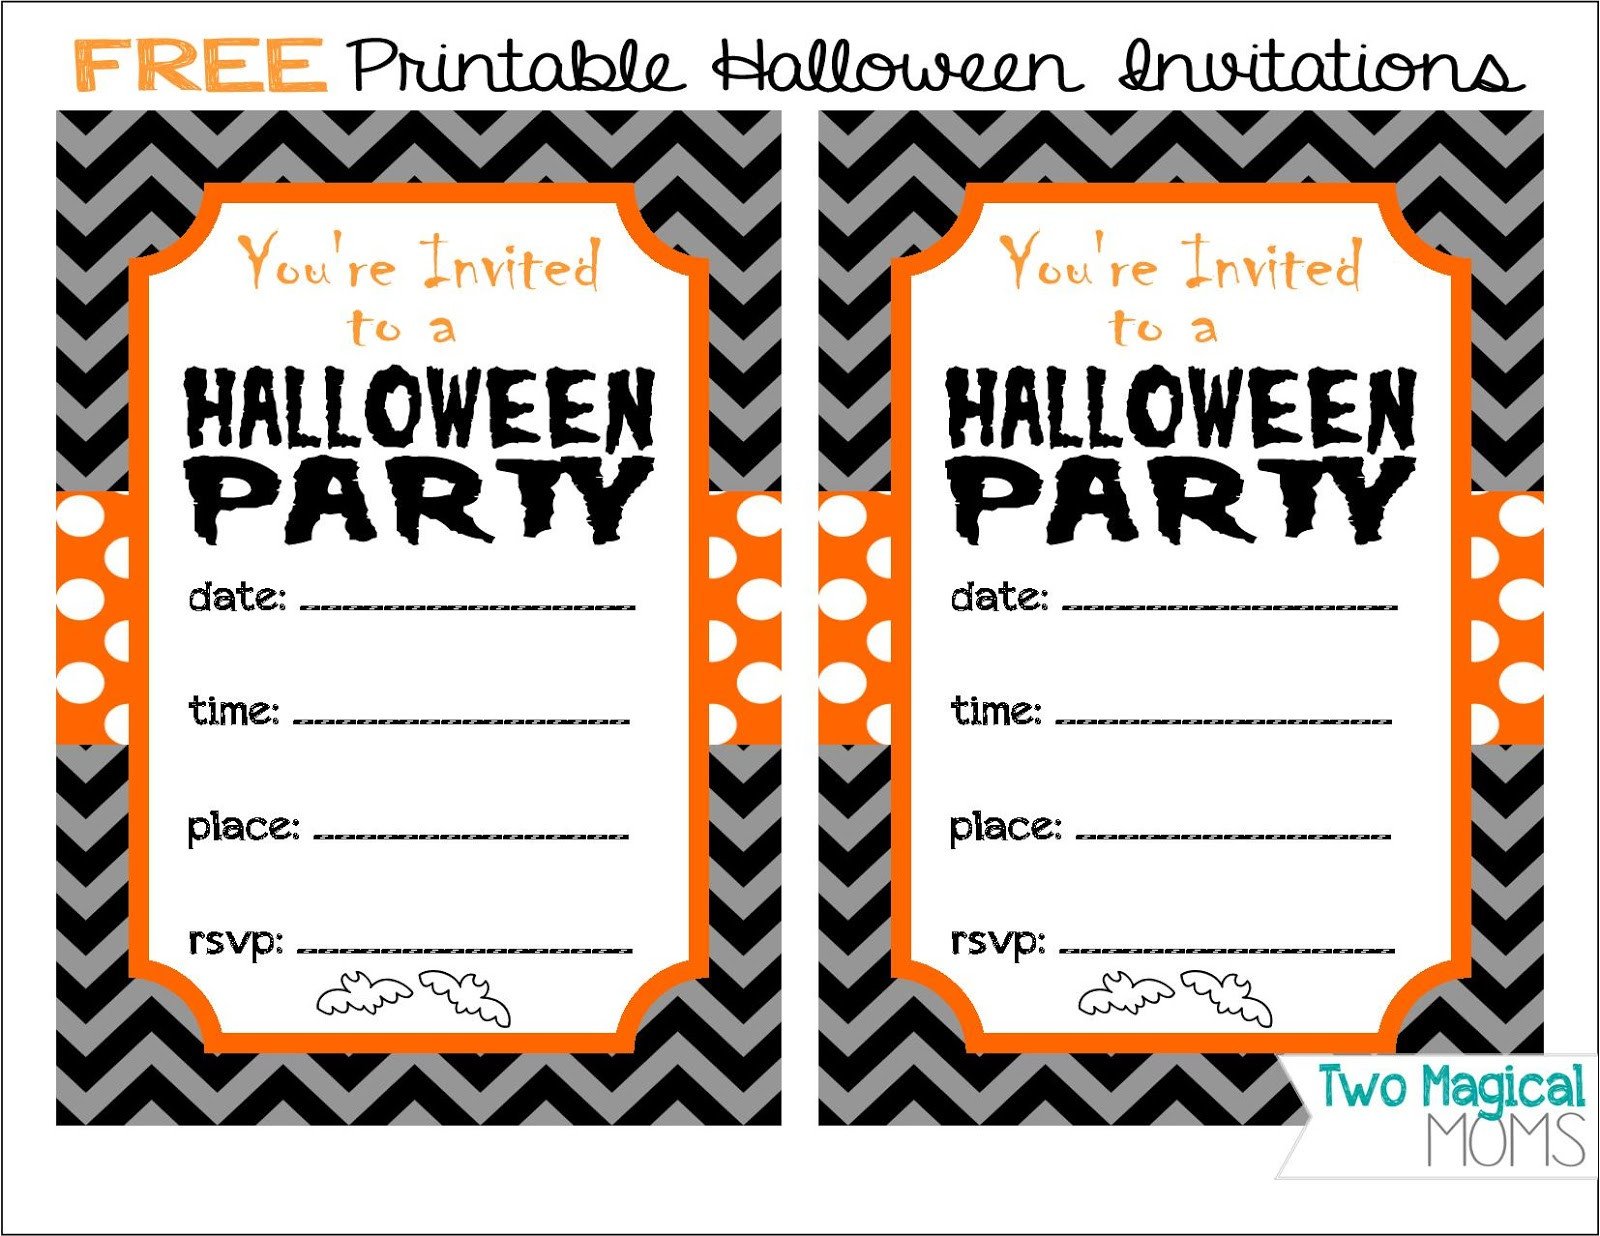 Two Magical Moms FREE Printable Halloween Invitations